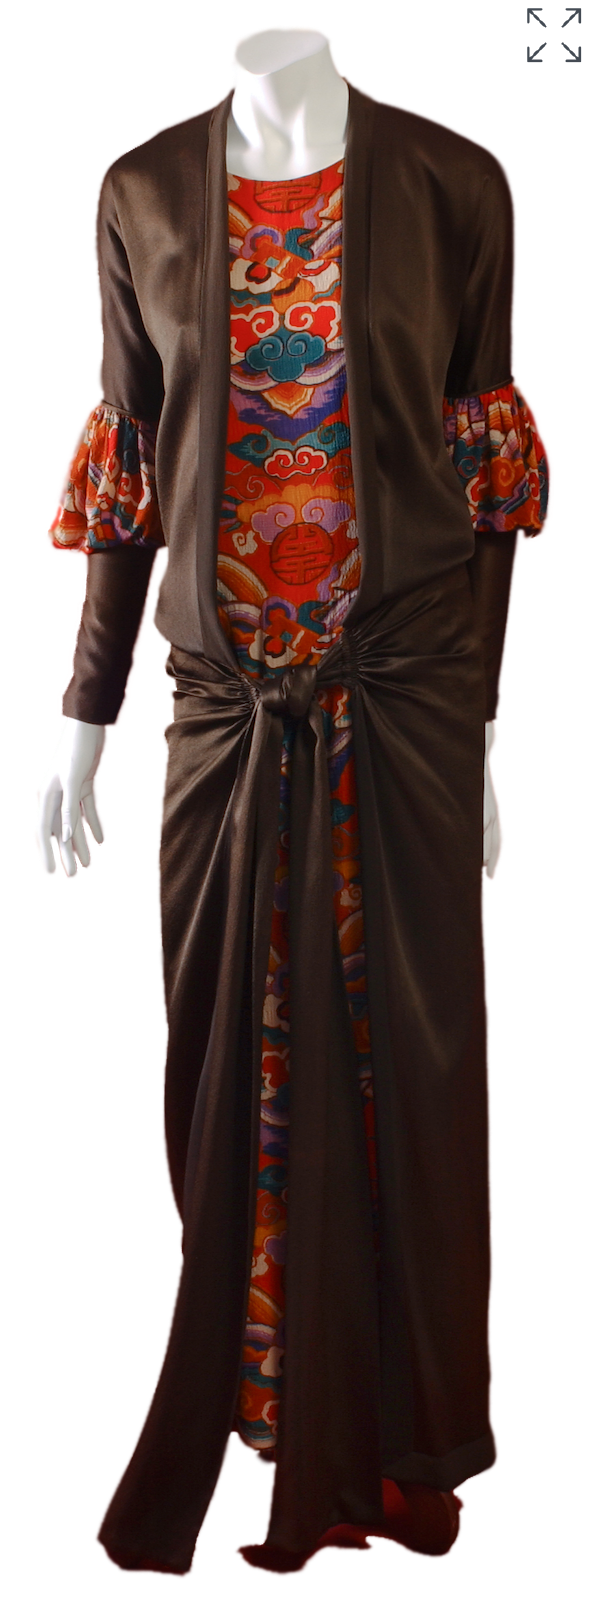 Front view of a 1927 Milgrim evening dress composed of a multicolor long sleeveless sheath in printed silk crinkle crepe with a woven cloud motifs underneath a long brown satin overdress knotted at the hips